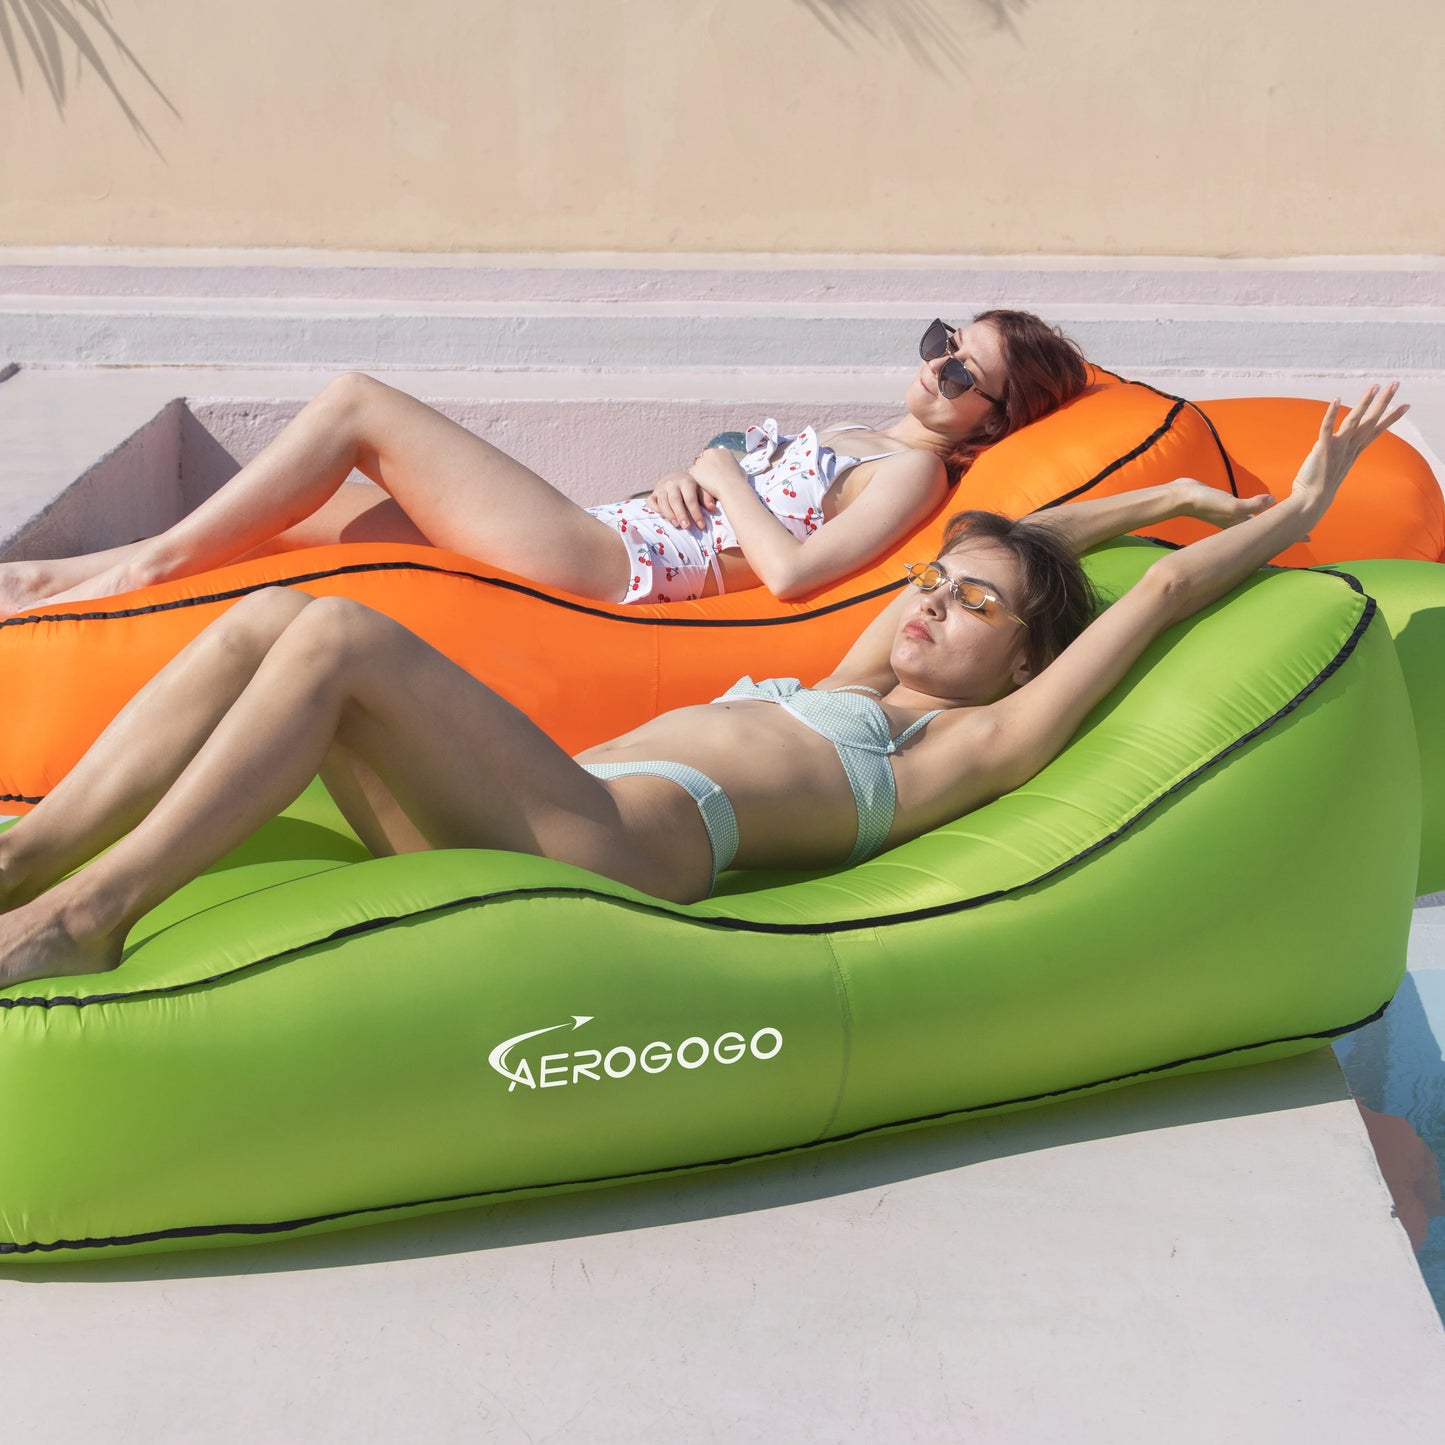 One-Key Automatic Inflatable Lounger Foldable Air Bed Sofa for Home Party / Camping / Office Portable Lounger Fast Inflating Bed